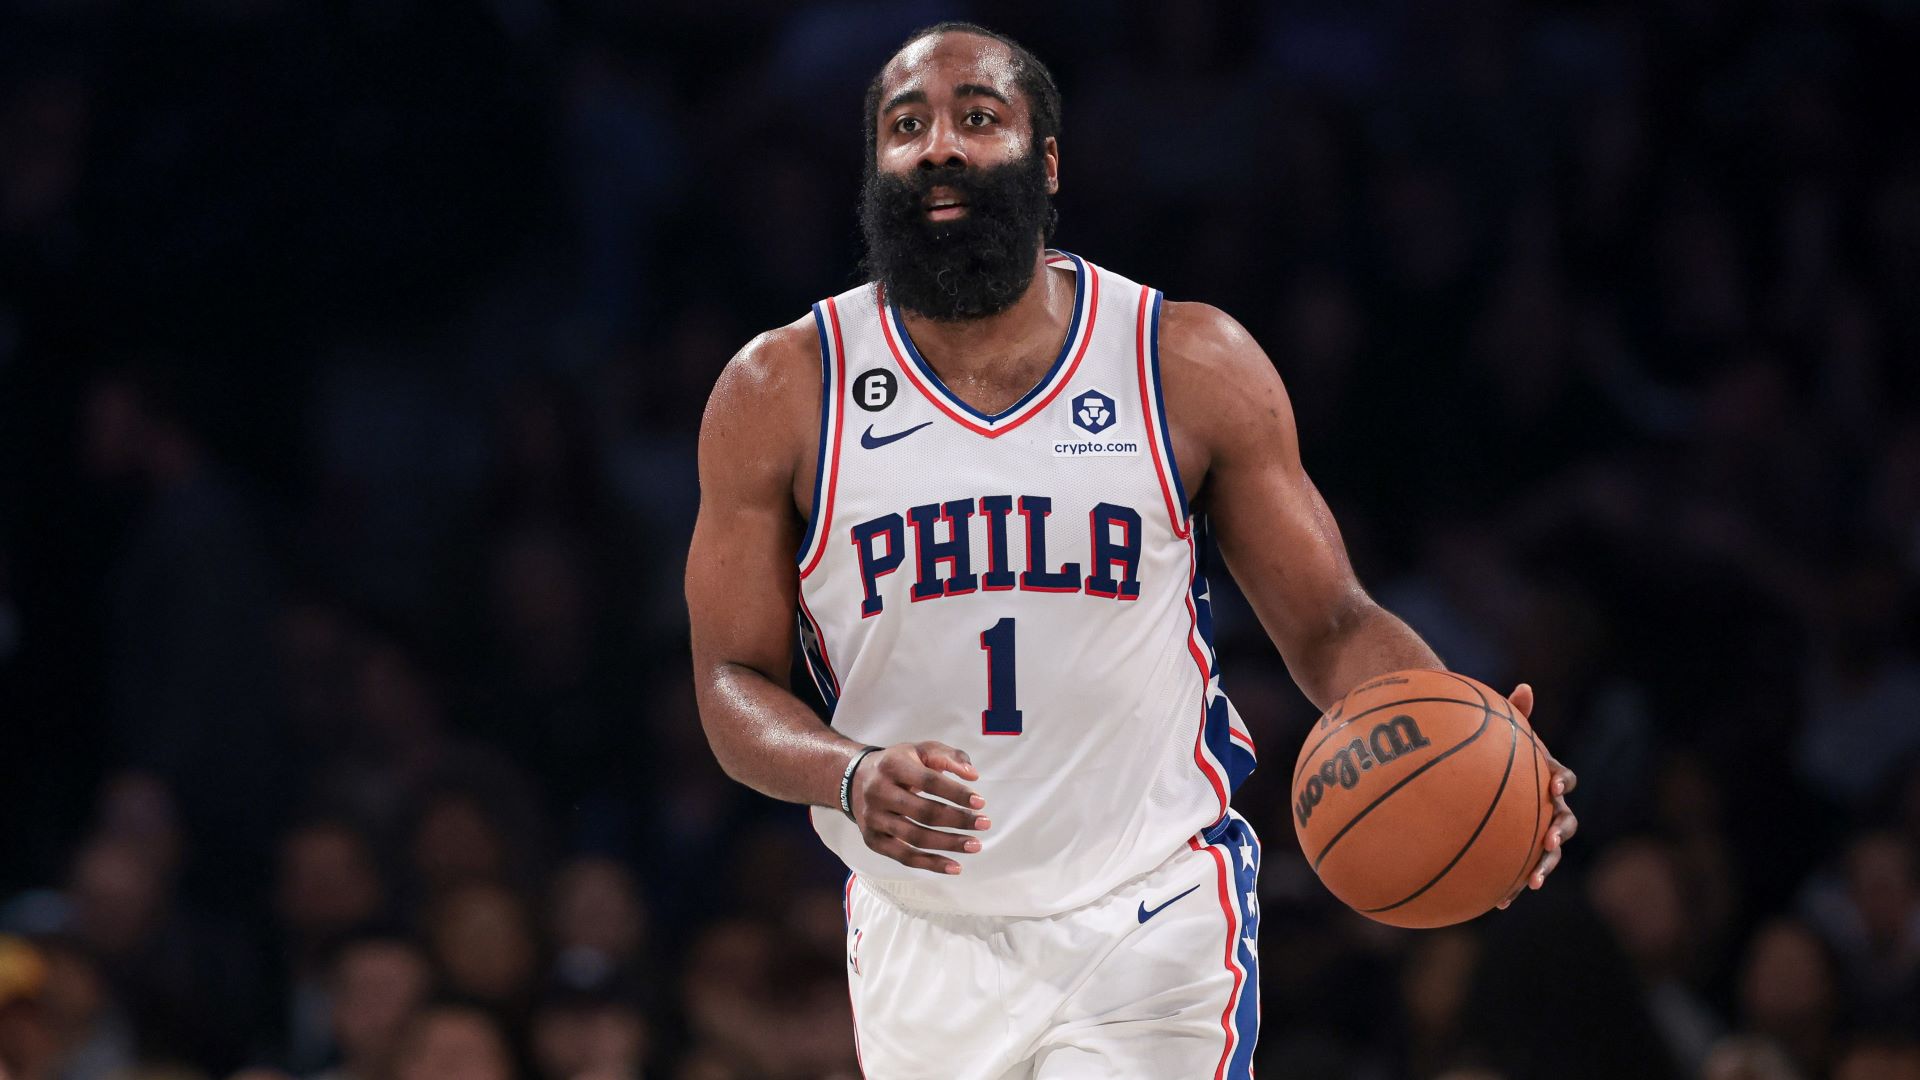 James Harden showed up to Game 5 in a $3,000 outfit